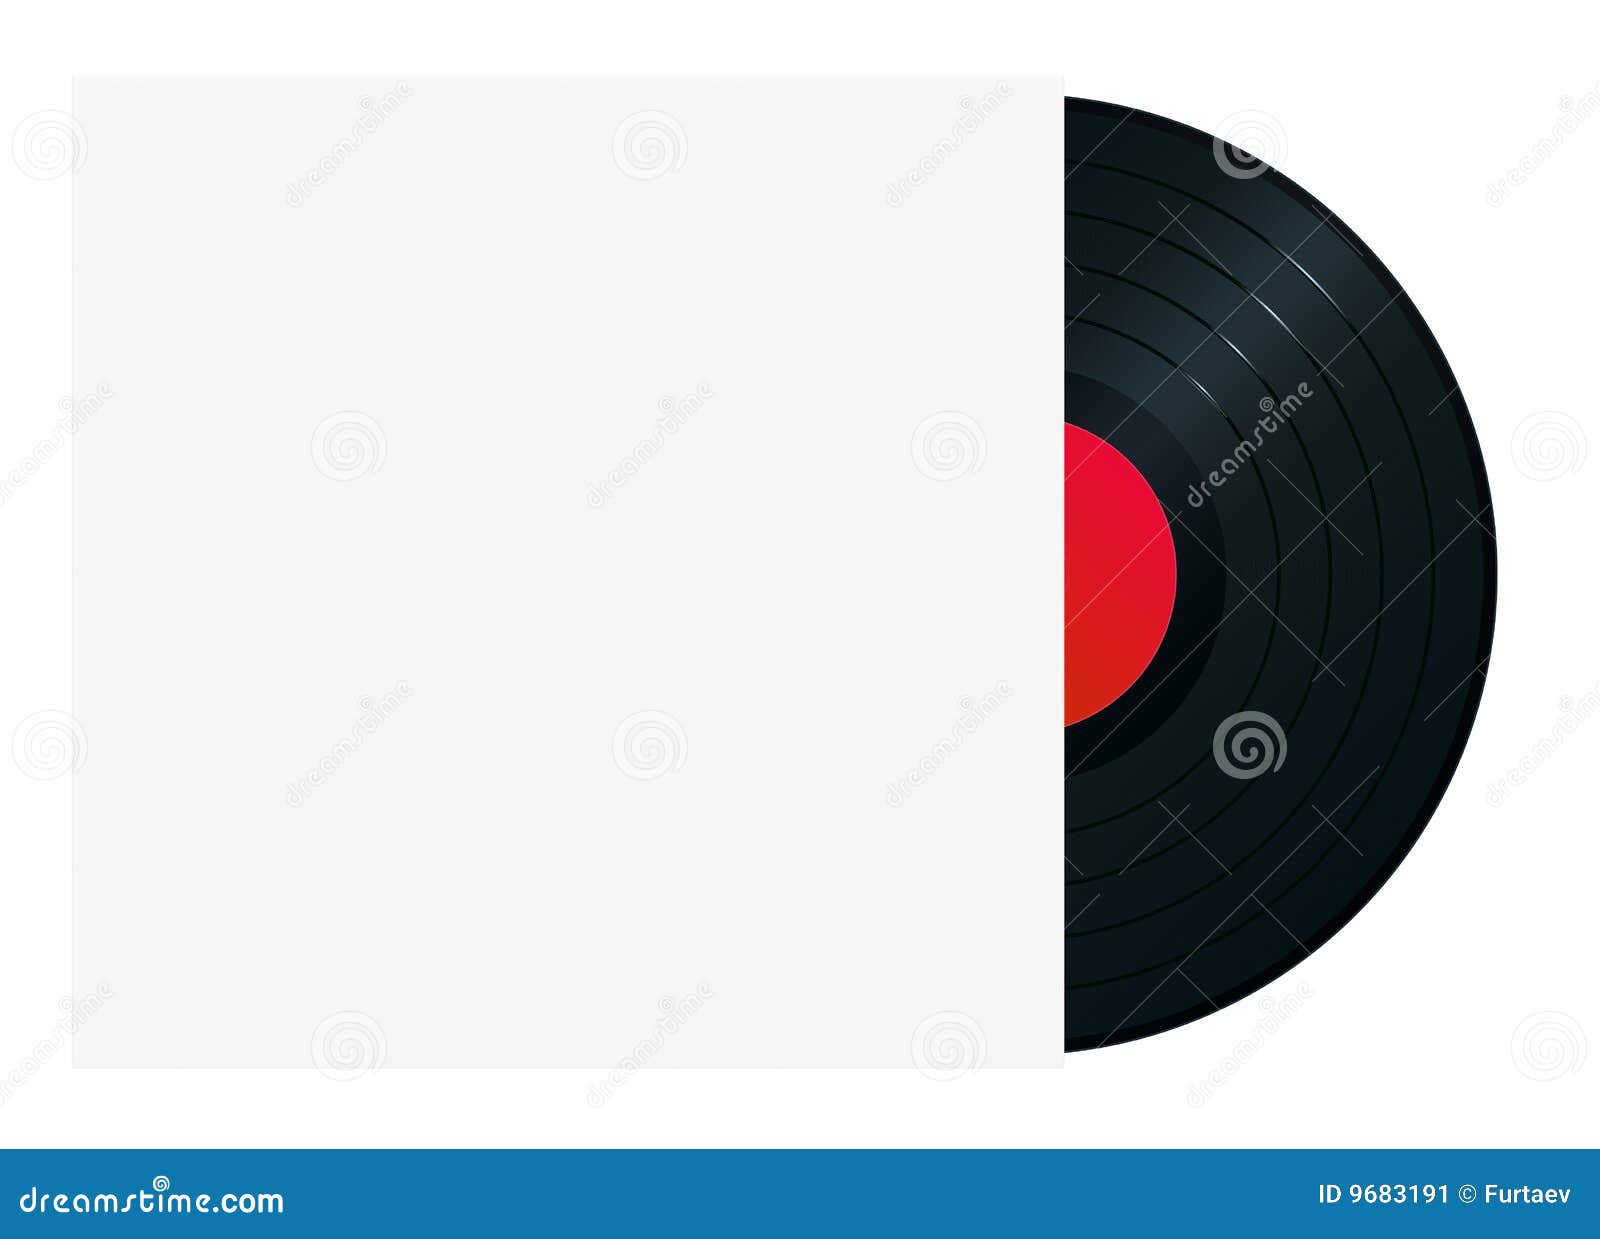 3,177 Record Sleeve Images, Stock Photos, 3D objects, & Vectors